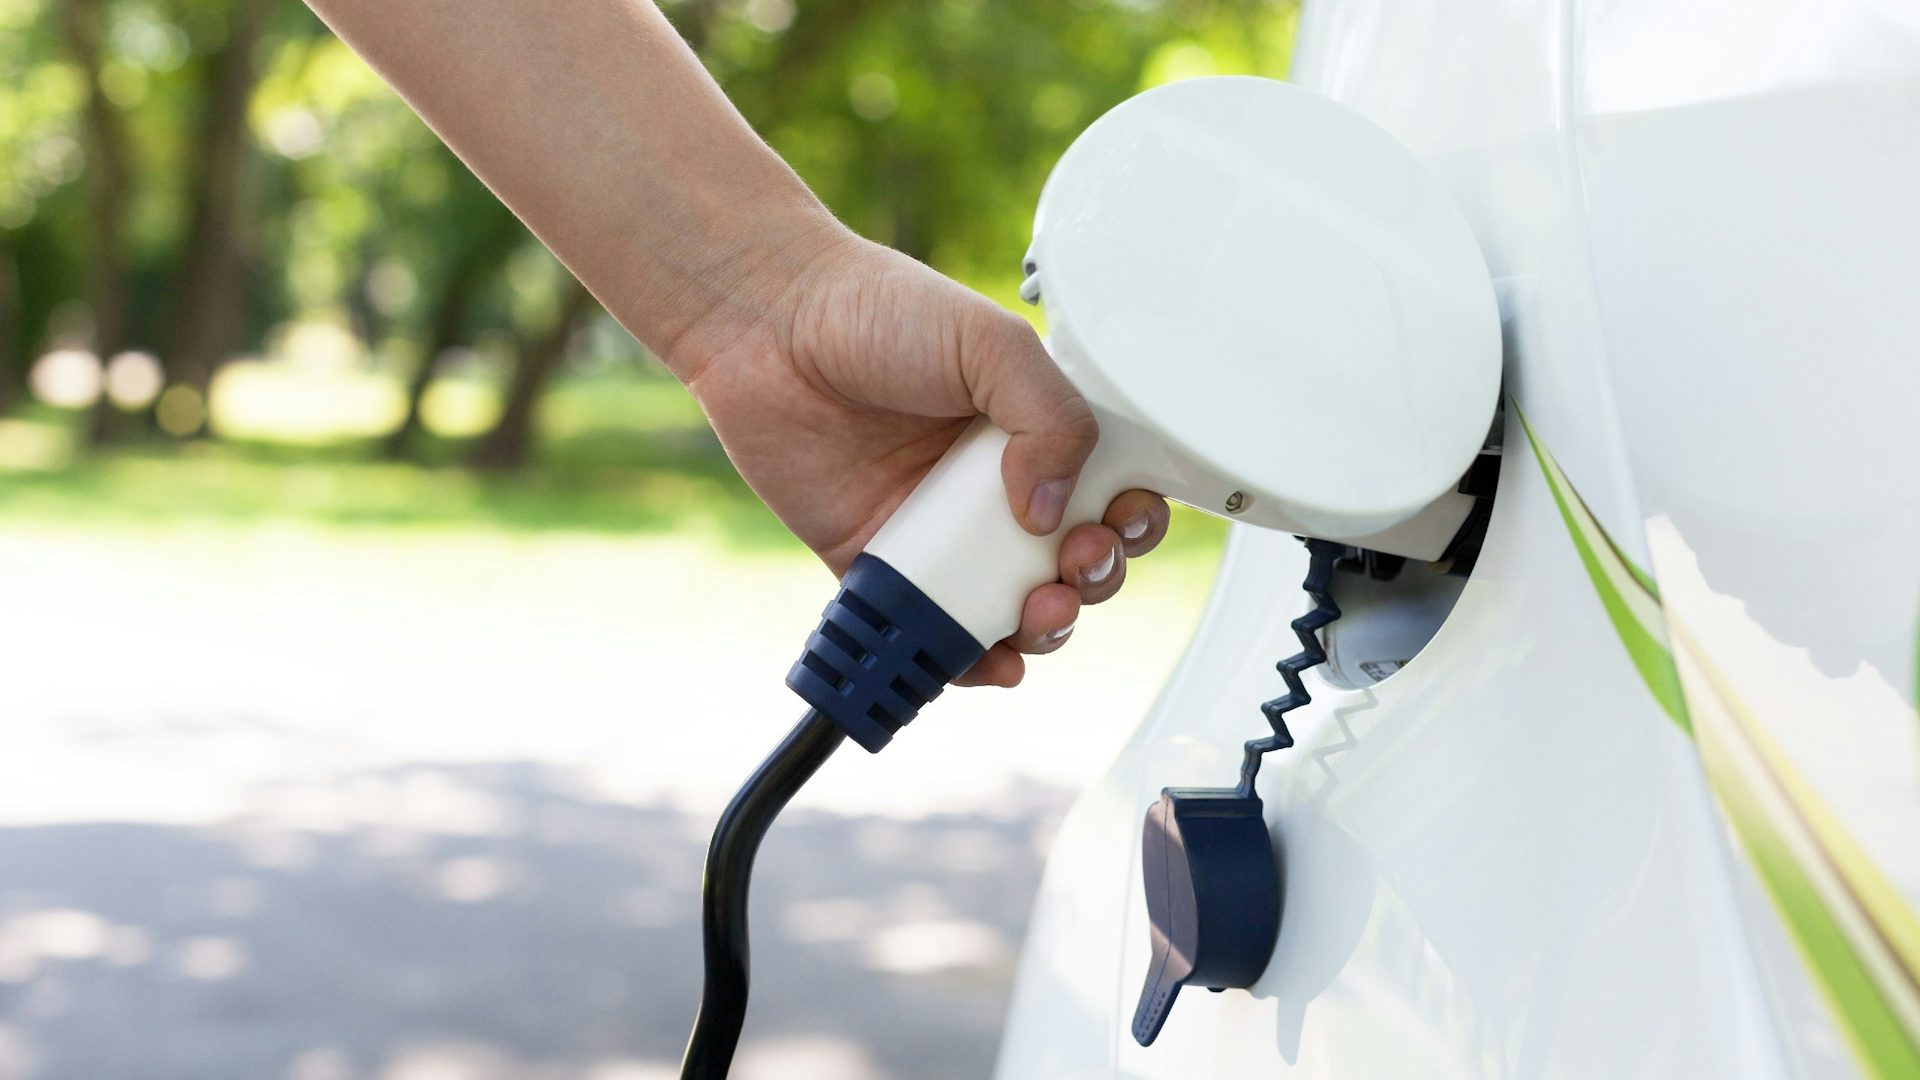 An electric charger being plugged into a car